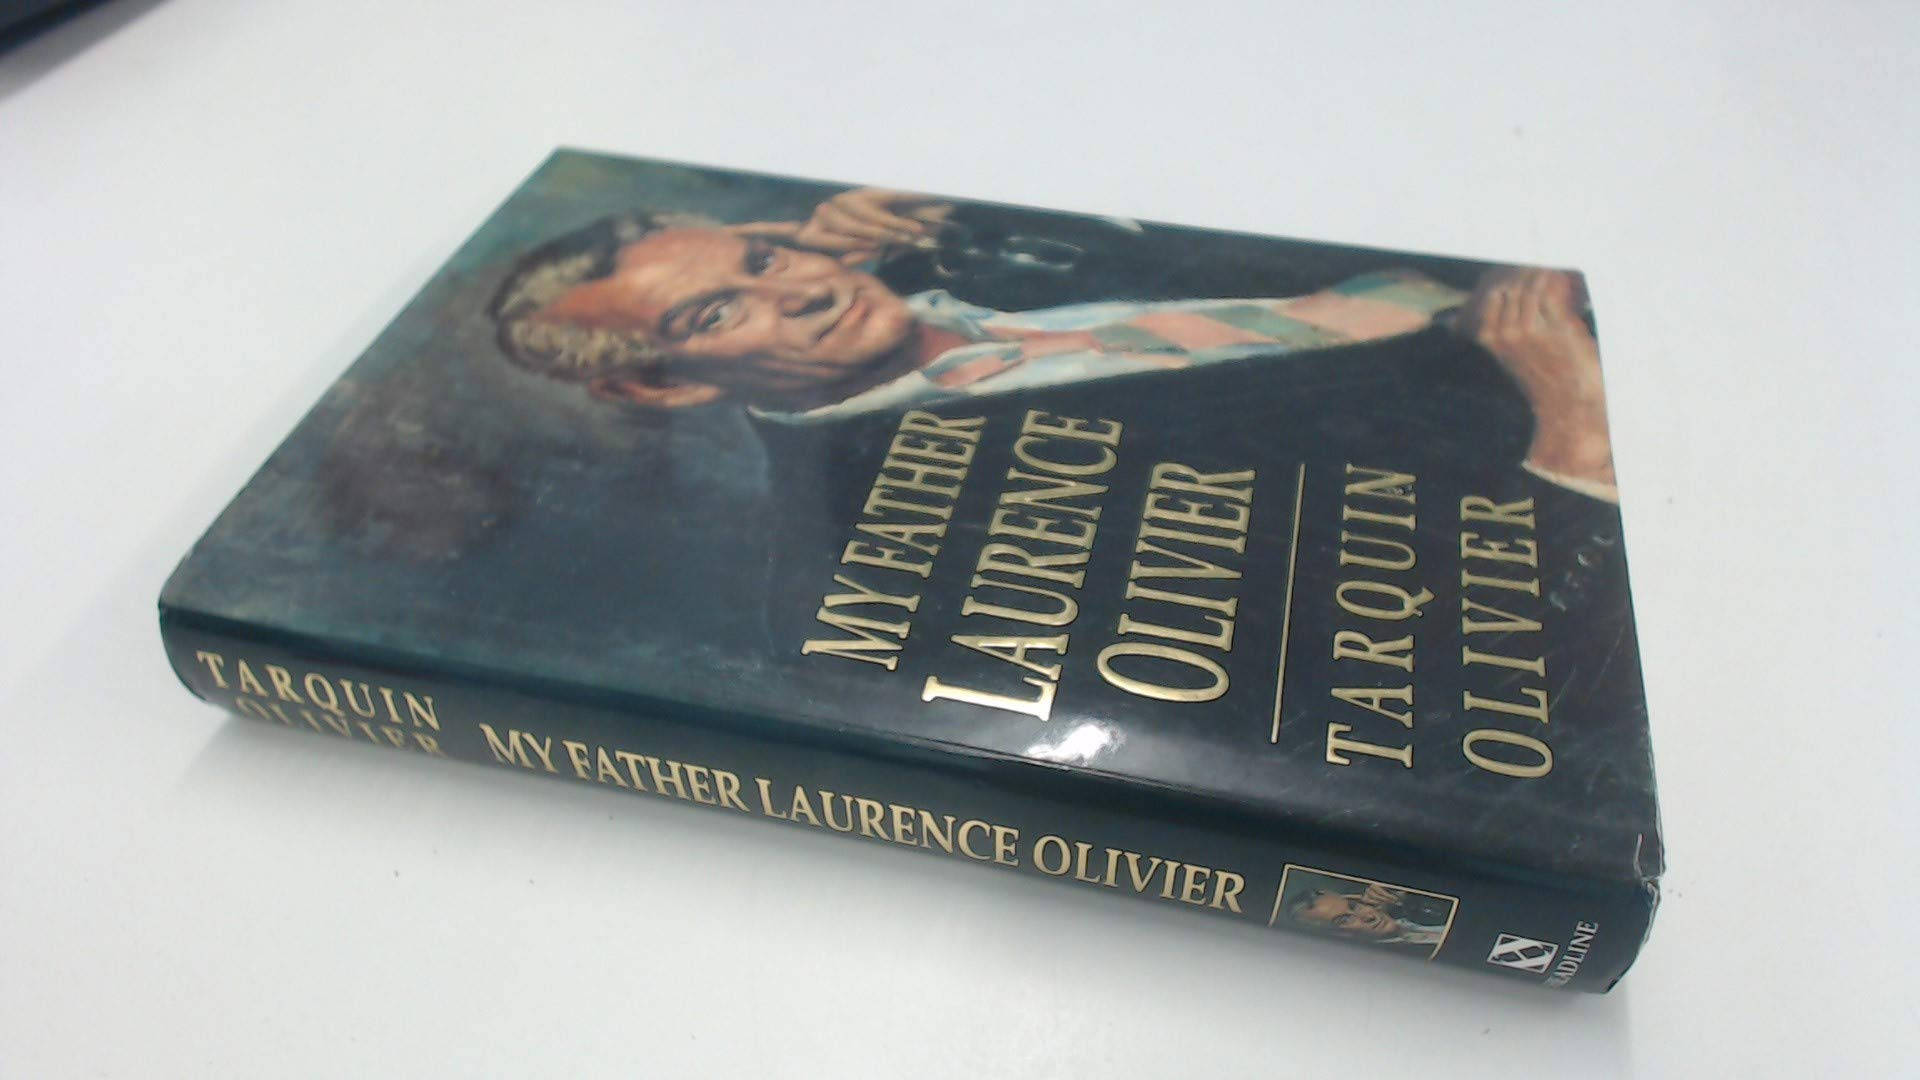 My Father Laurence Olivier By Tarquin Olivier Wallpaper